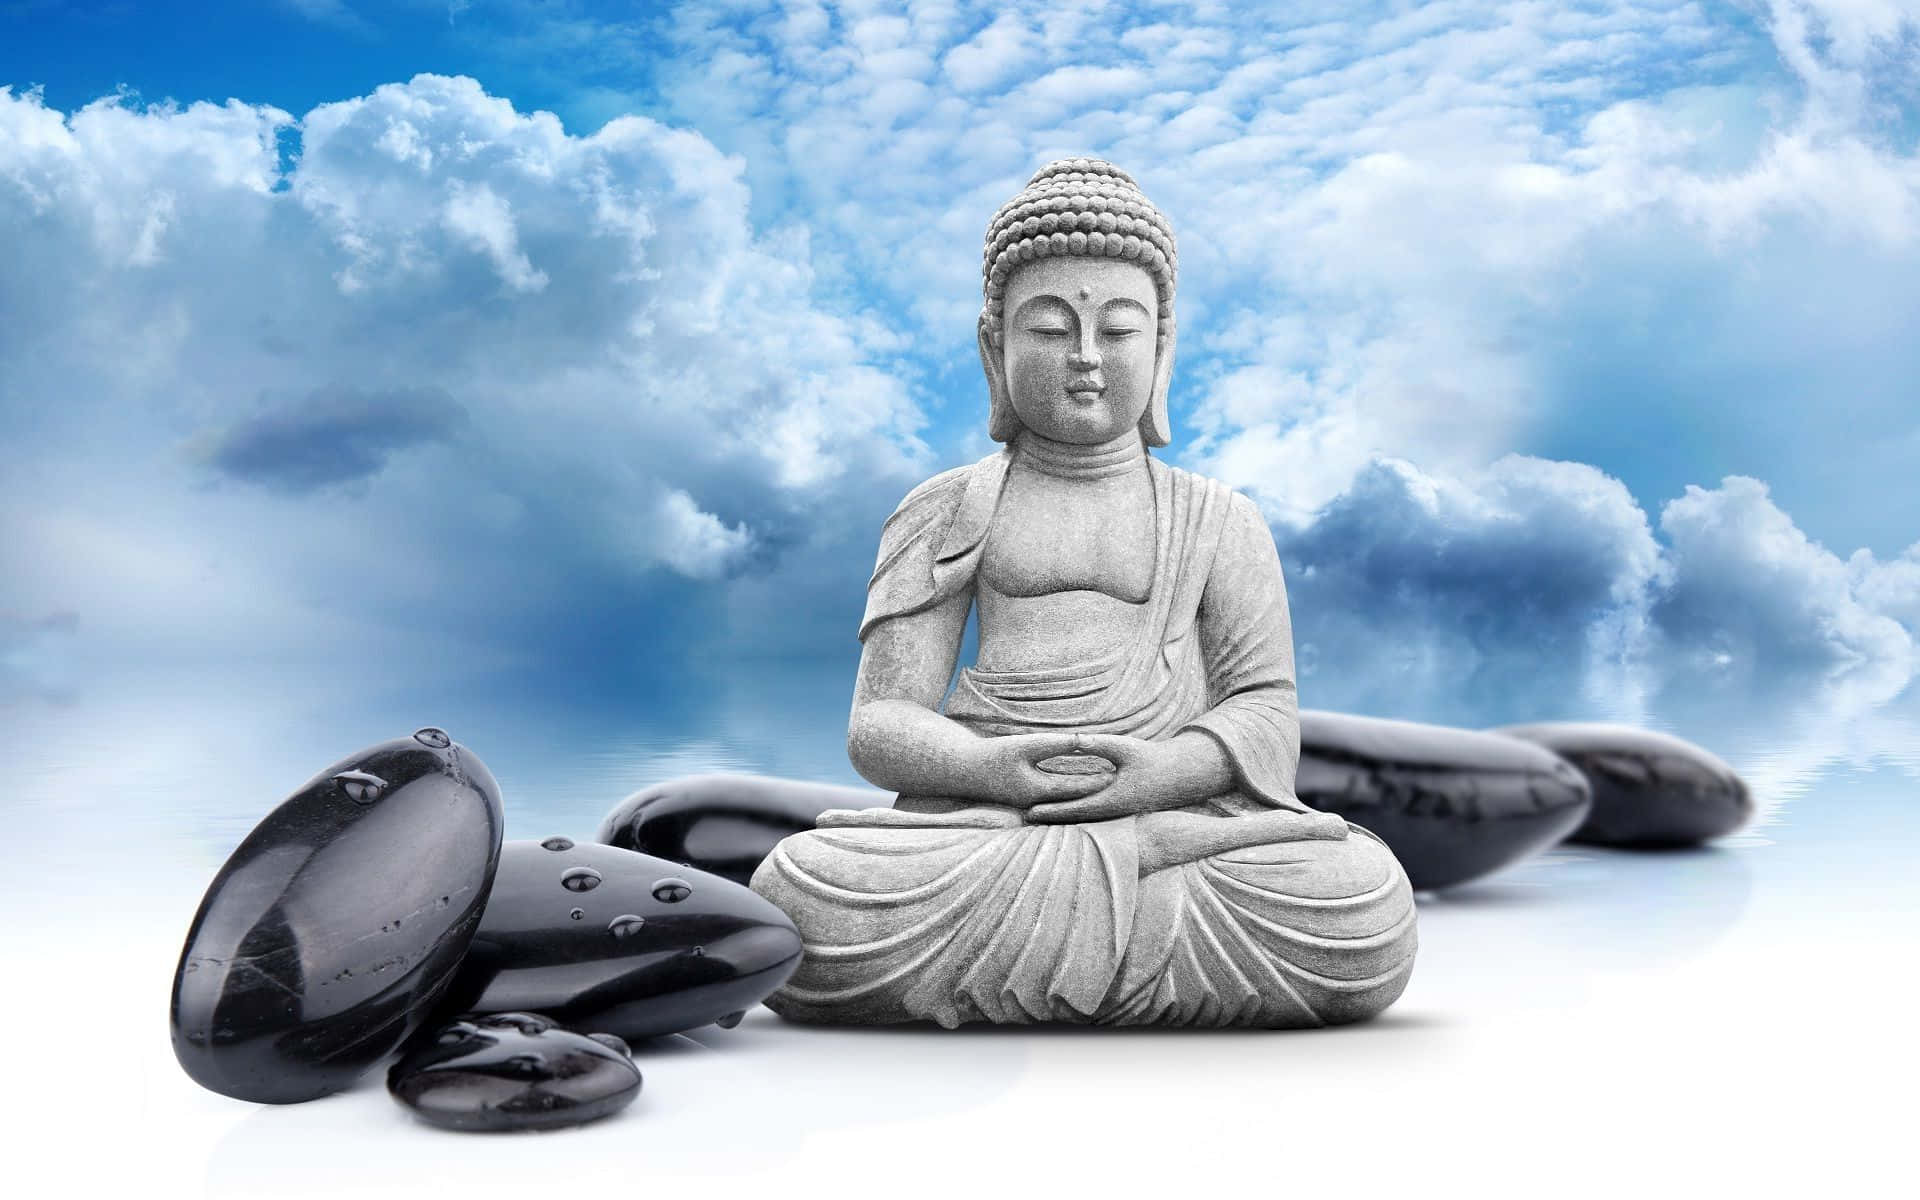 Feel inner peace with the sage wisdom of Buddha.